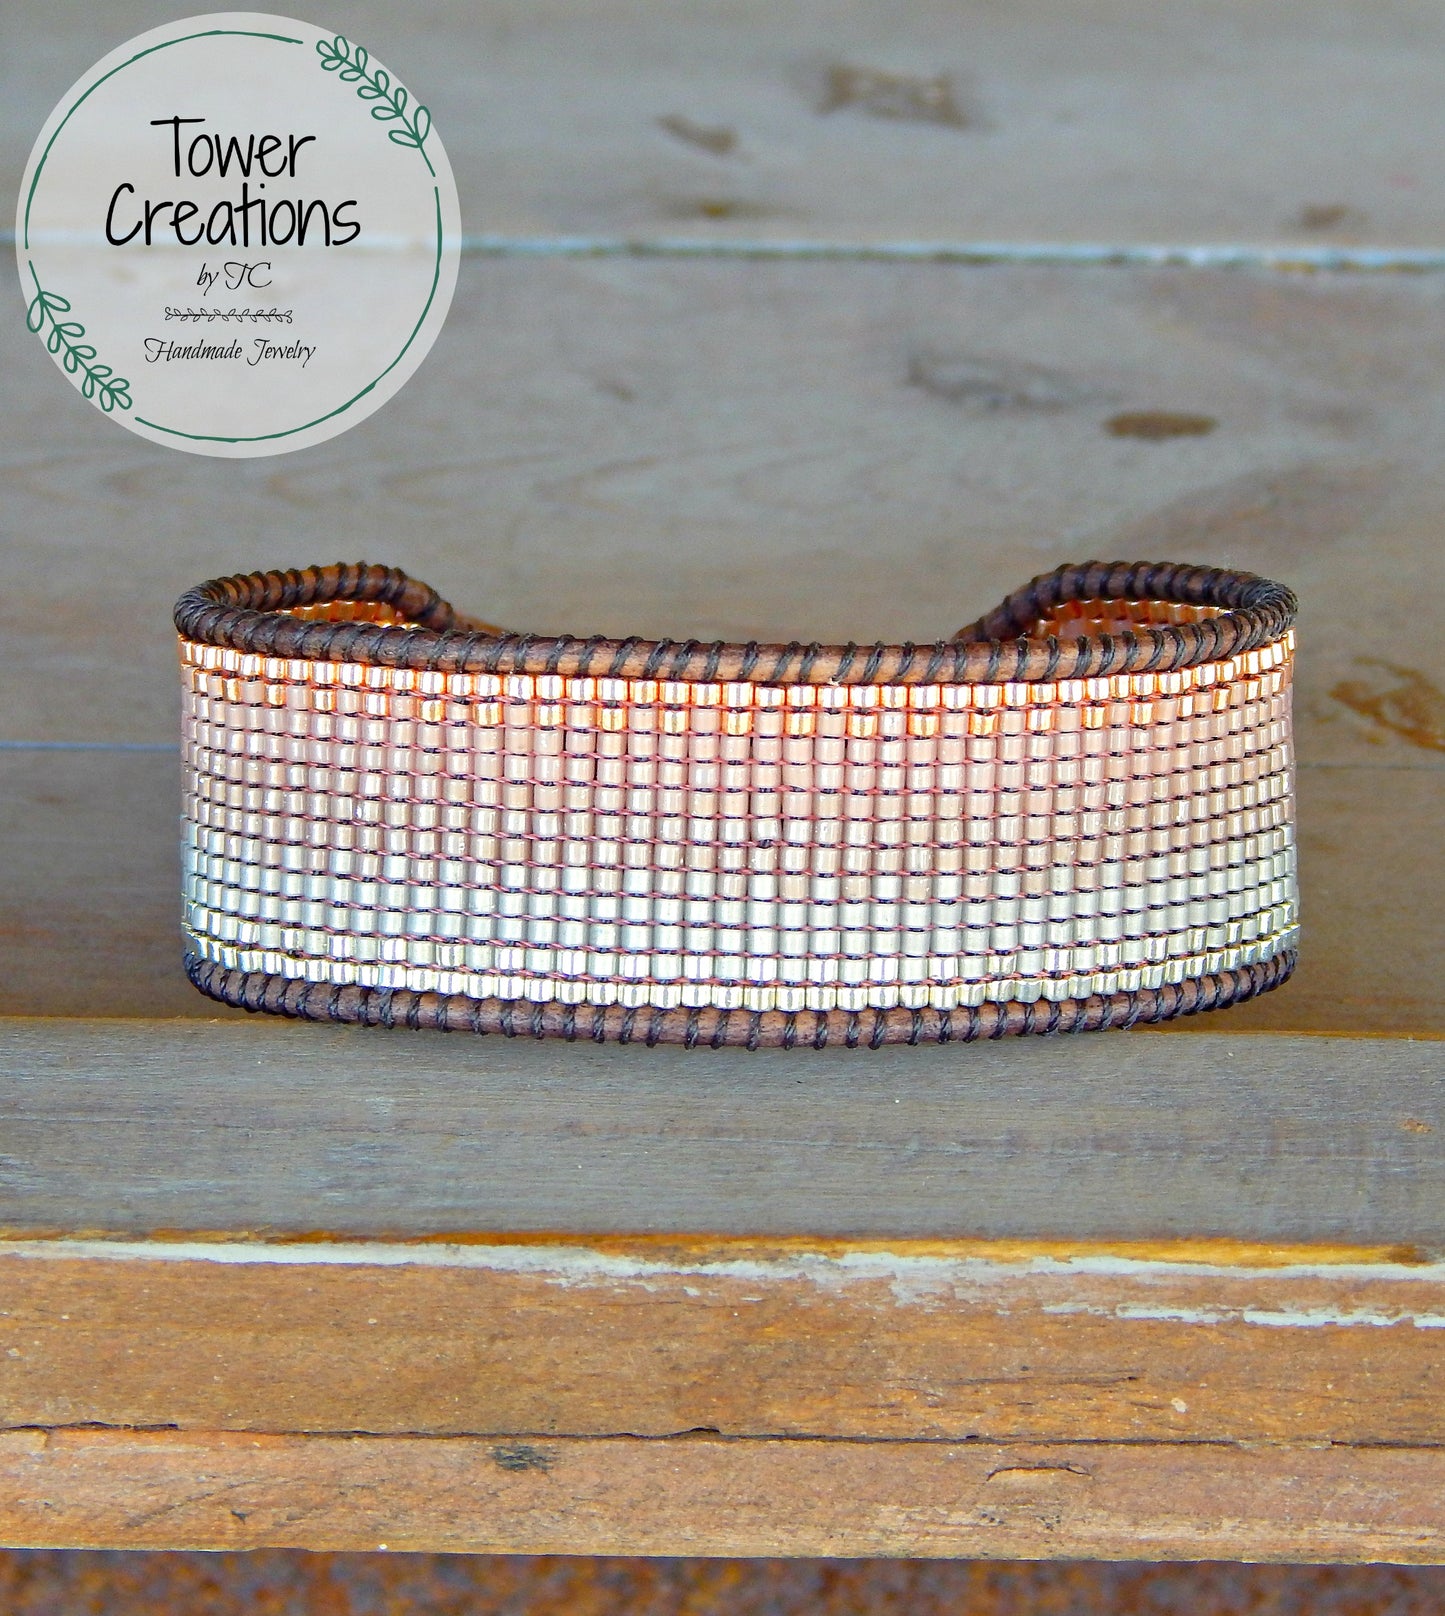 Ombre Copper to Silver tone Hand Beaded Cuff Bracelet